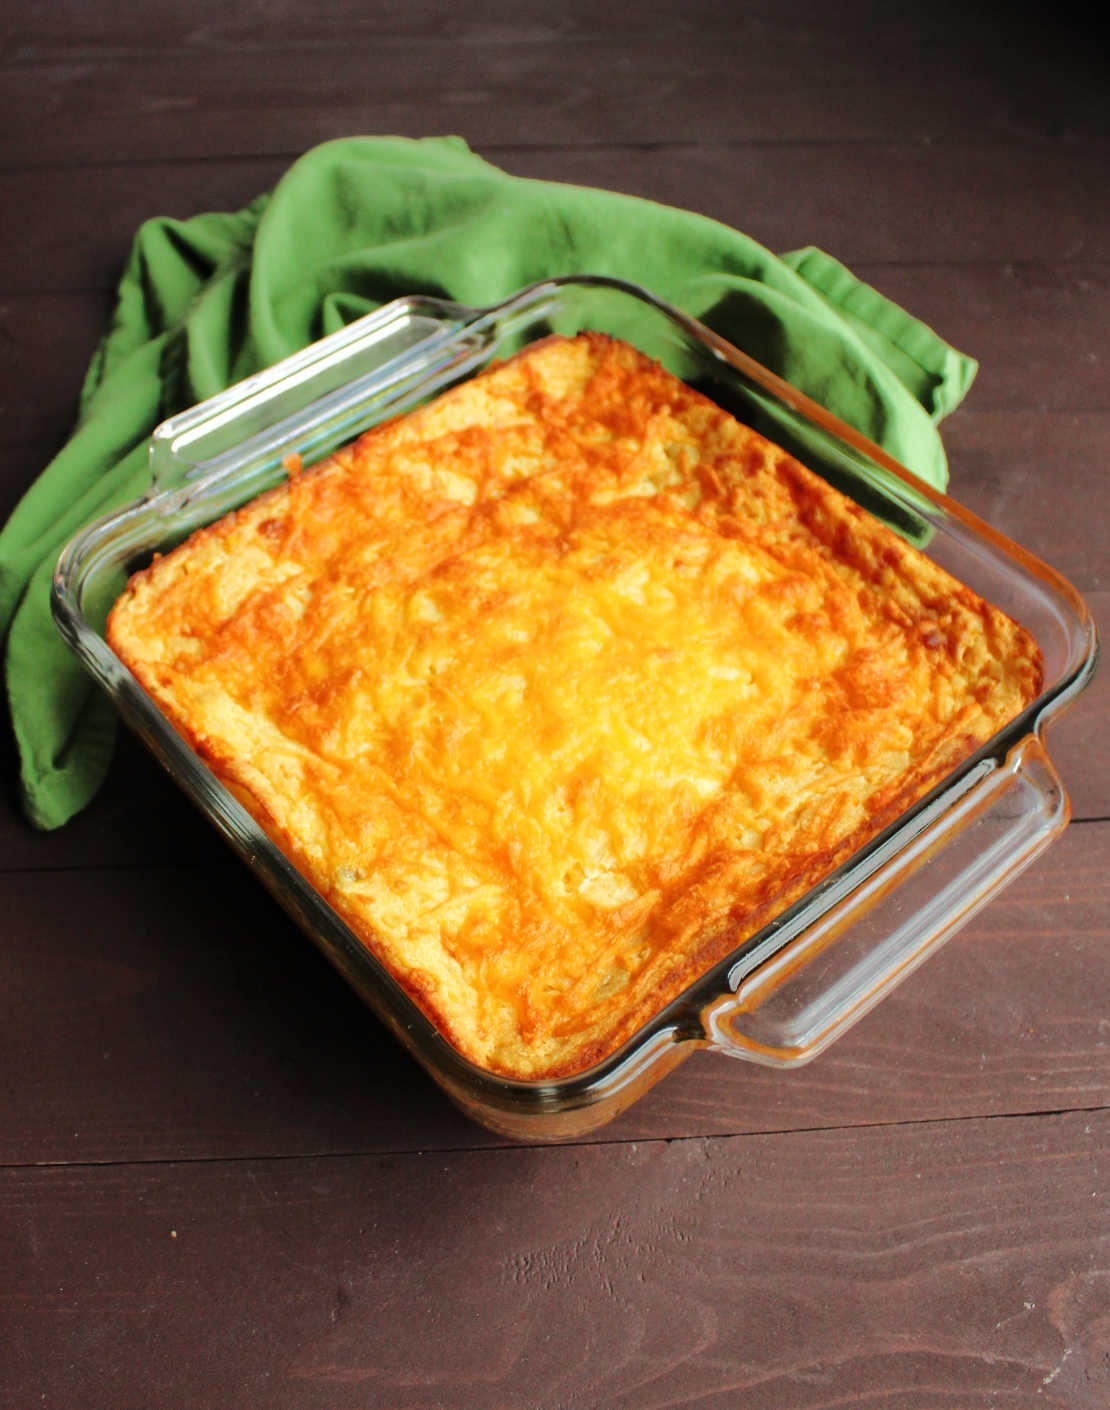 Pan of freshly baked green chile corn casserole with melted cheddar cheese on top.